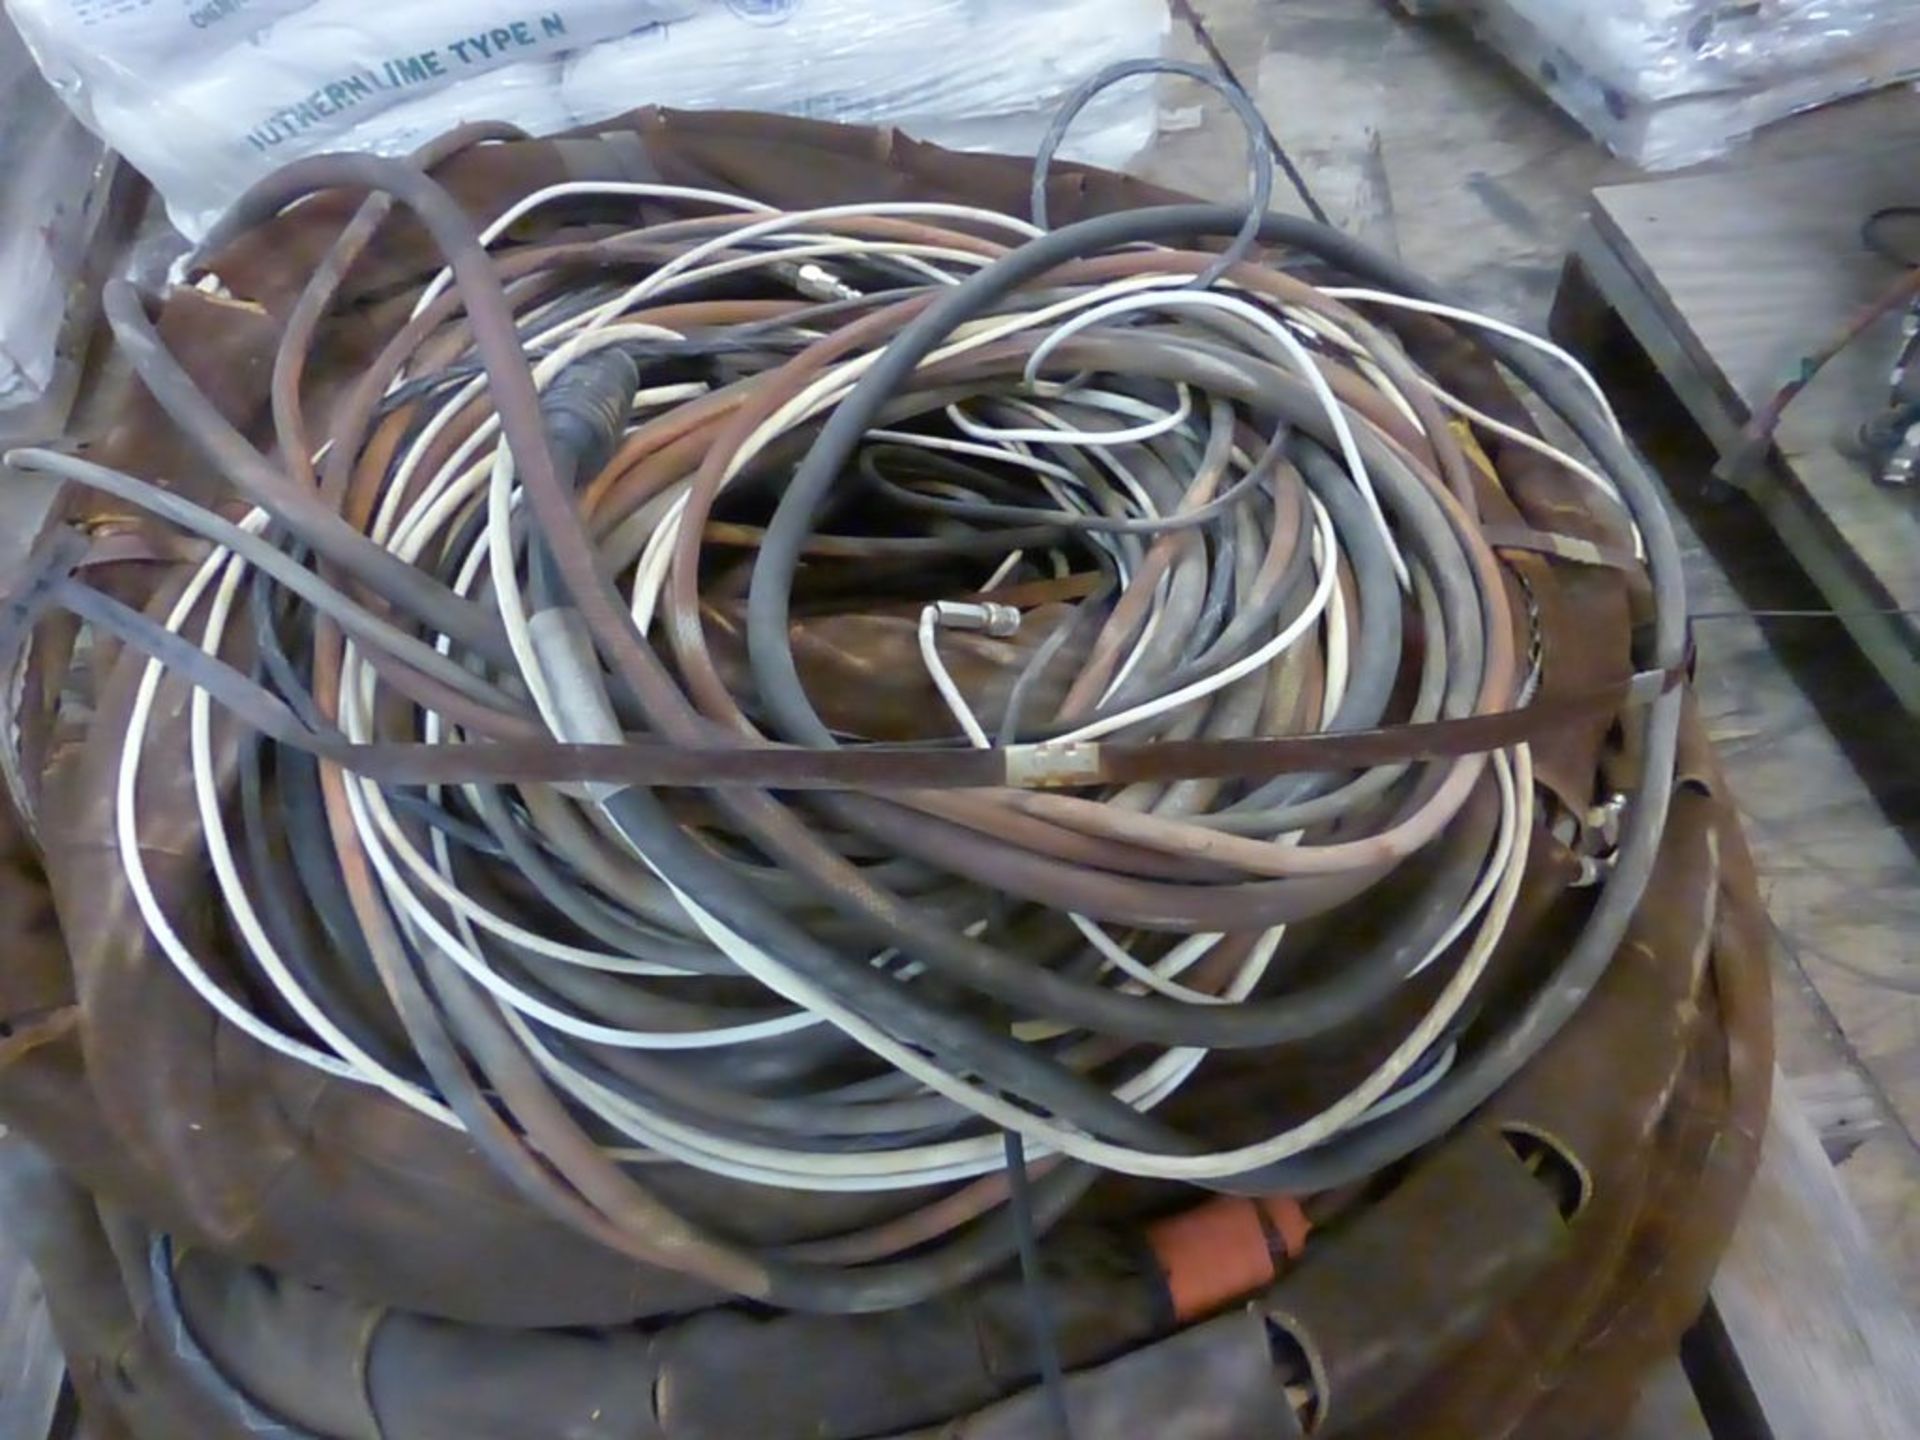 Lot of Robotic Welding Control Cables - Image 4 of 12